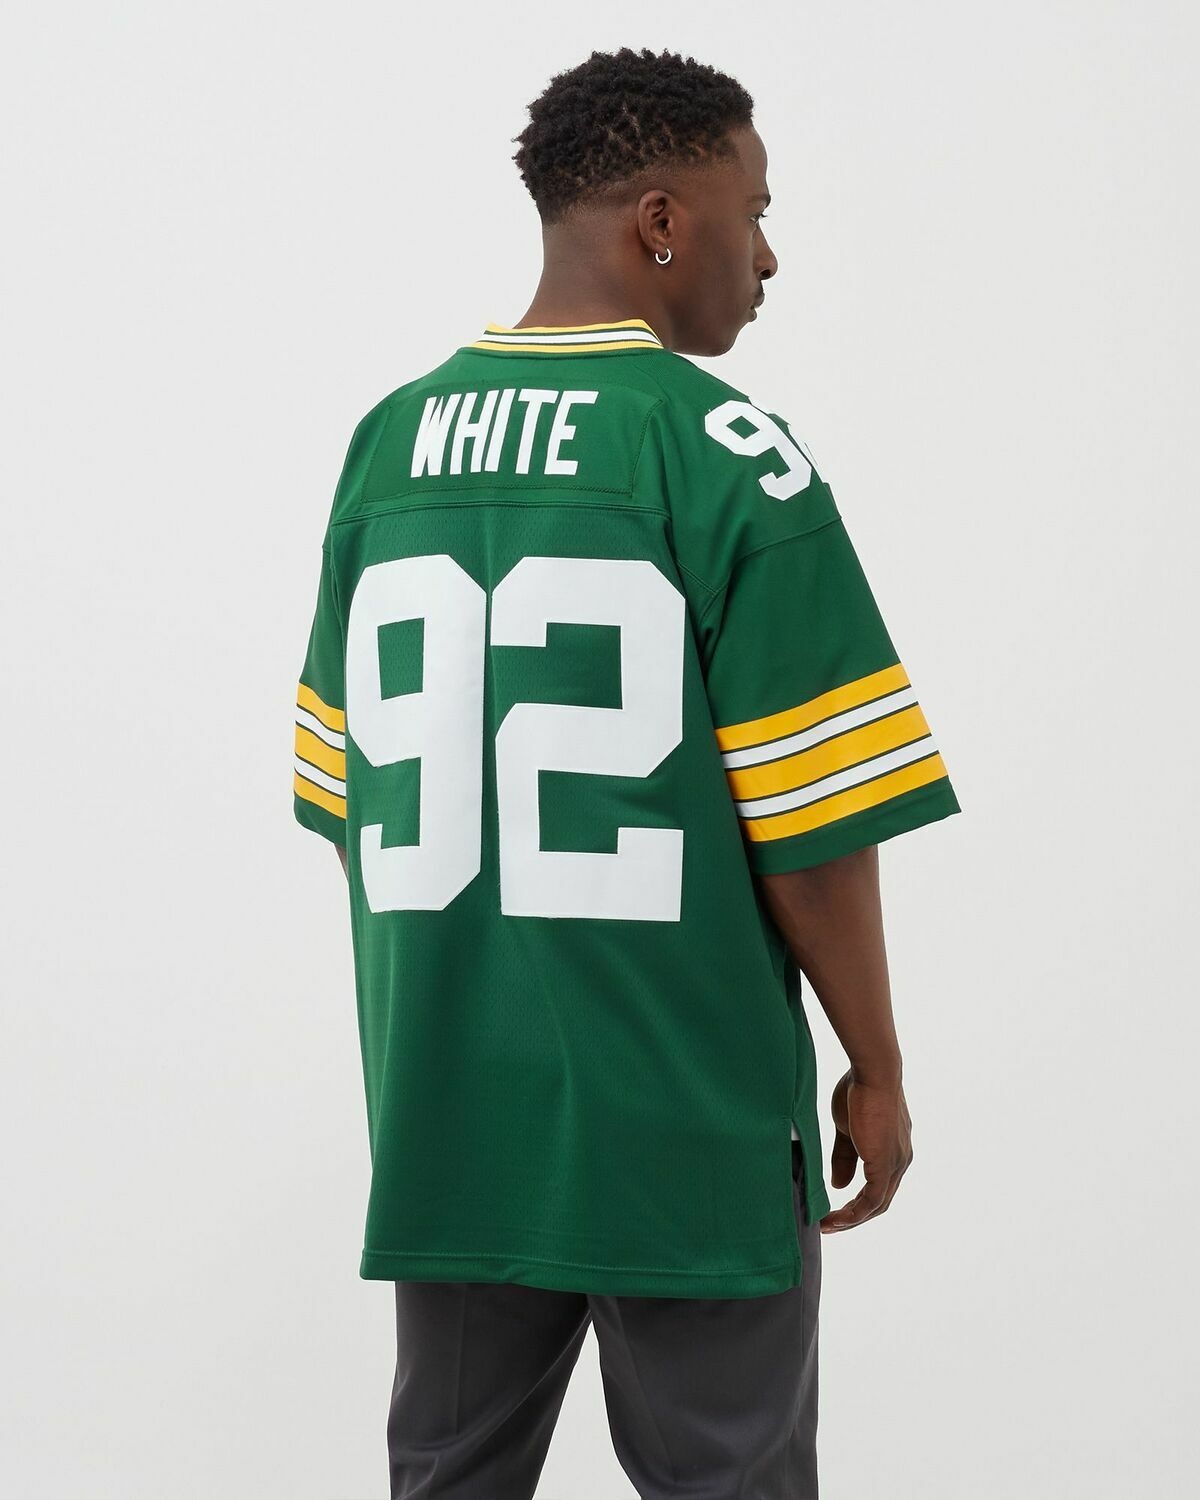 Mitchell & Ness Nfl Legacy Jersey Green Bay Packers 1996 Reggie White #92 Green - Mens - Jerseys